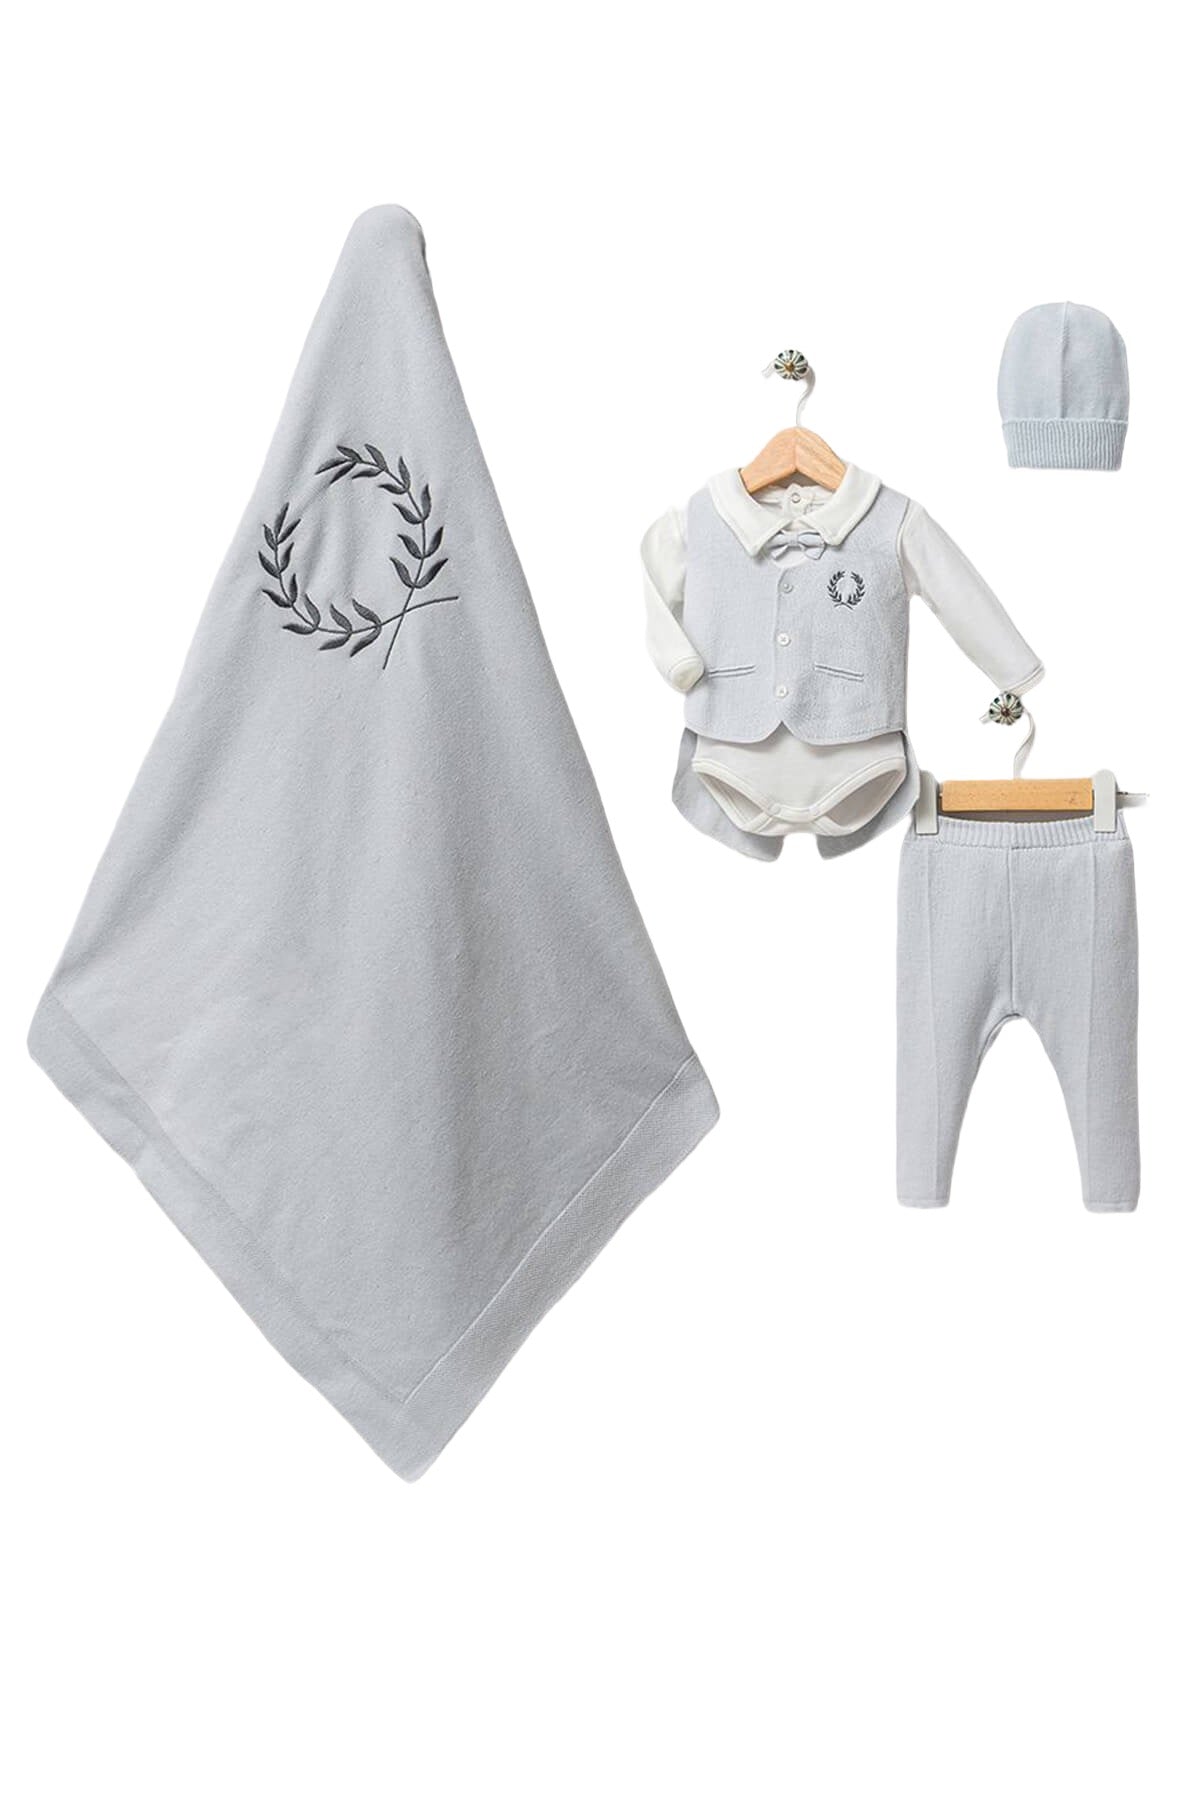 Kevin Baby Blue Knit Newborn Coming Home Set (5 Pcs)